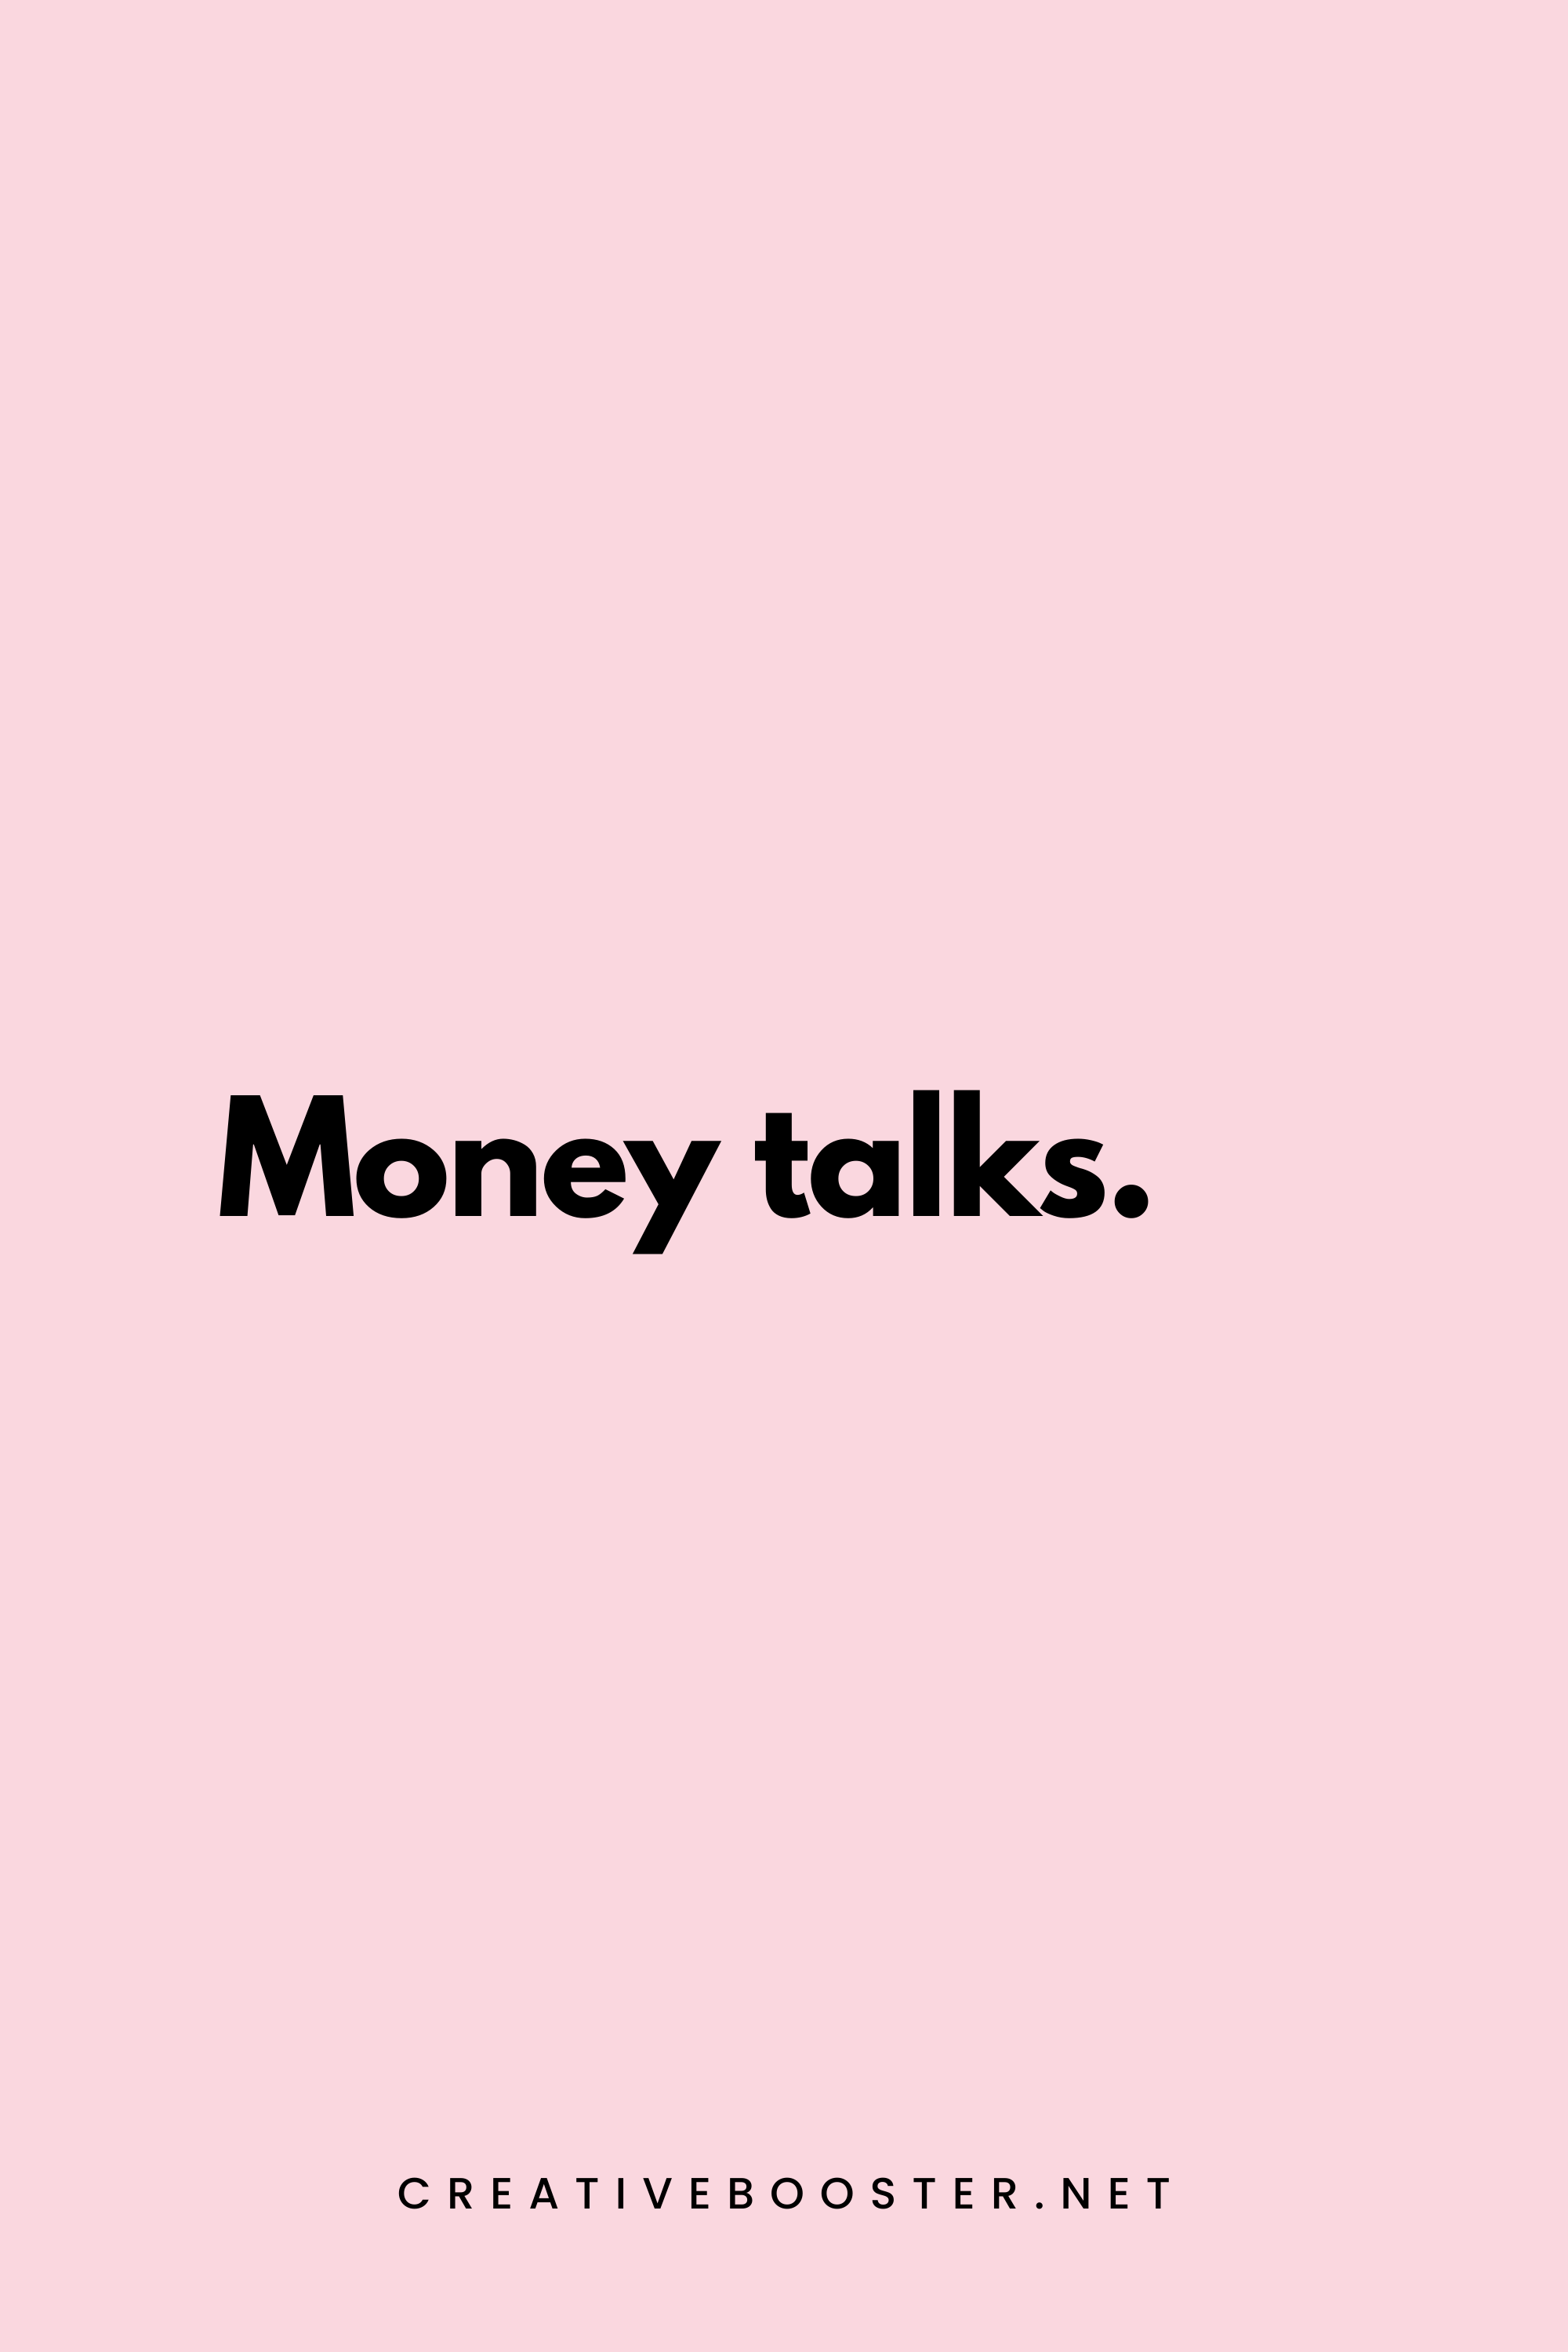 27. Money talks. - Unknown - 2. Short Financial Freedom Quotes